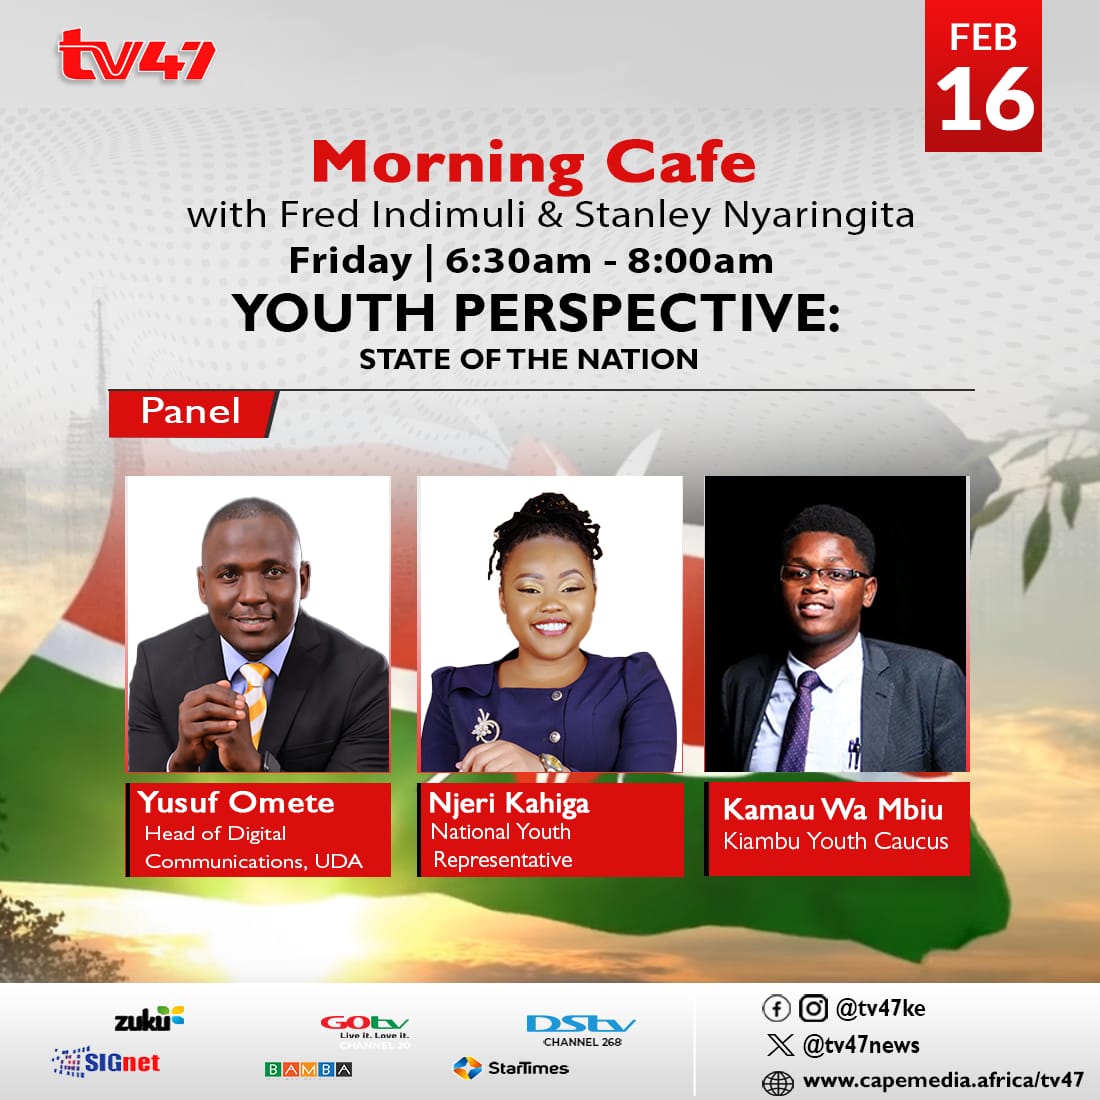 Friday is the day to set your spirit free and your dreams take flight!😜😜

Don't miss to catch the 'State of the Nation' discussion on #YouthPerspective from 6:30am with @Fredindimuli and @Nyaringita_ on #MorningCafe